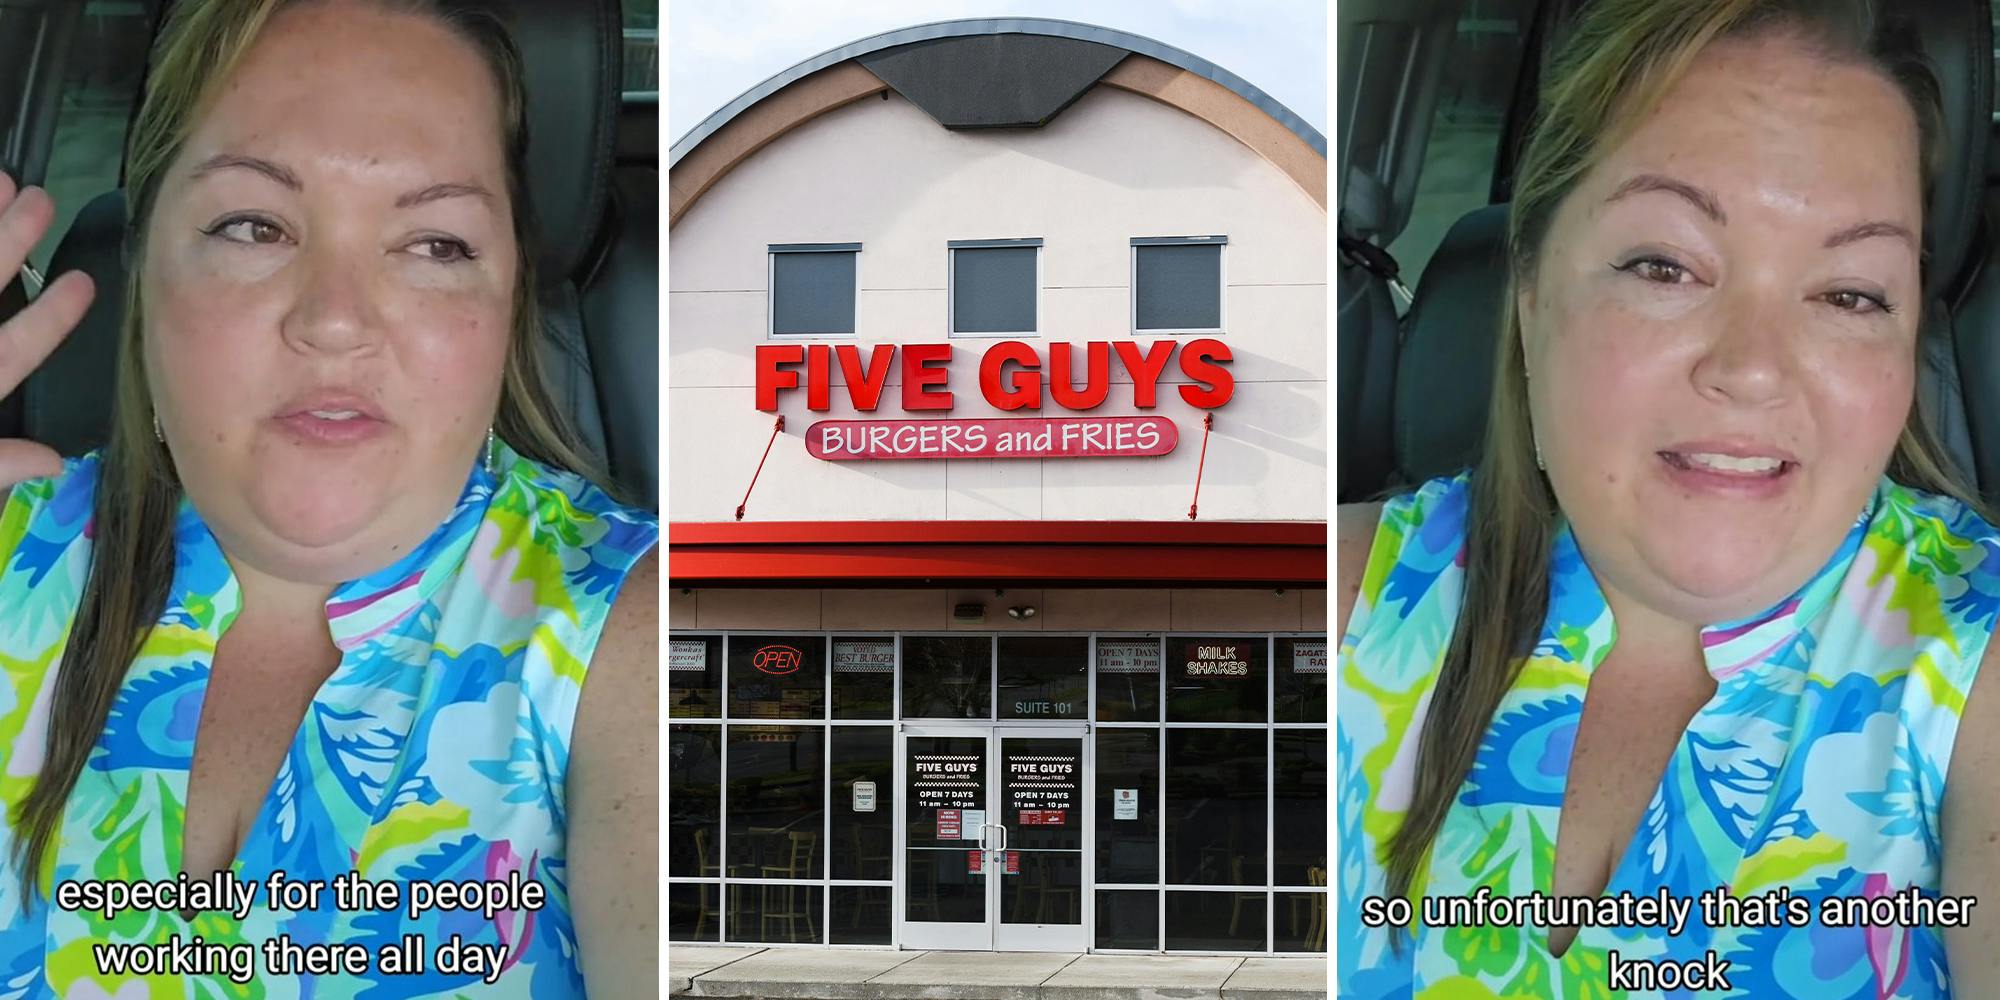 Secret shopper gets cheeseburger meal from 'super clean' and 'friendly' Five Guys location. They still failed